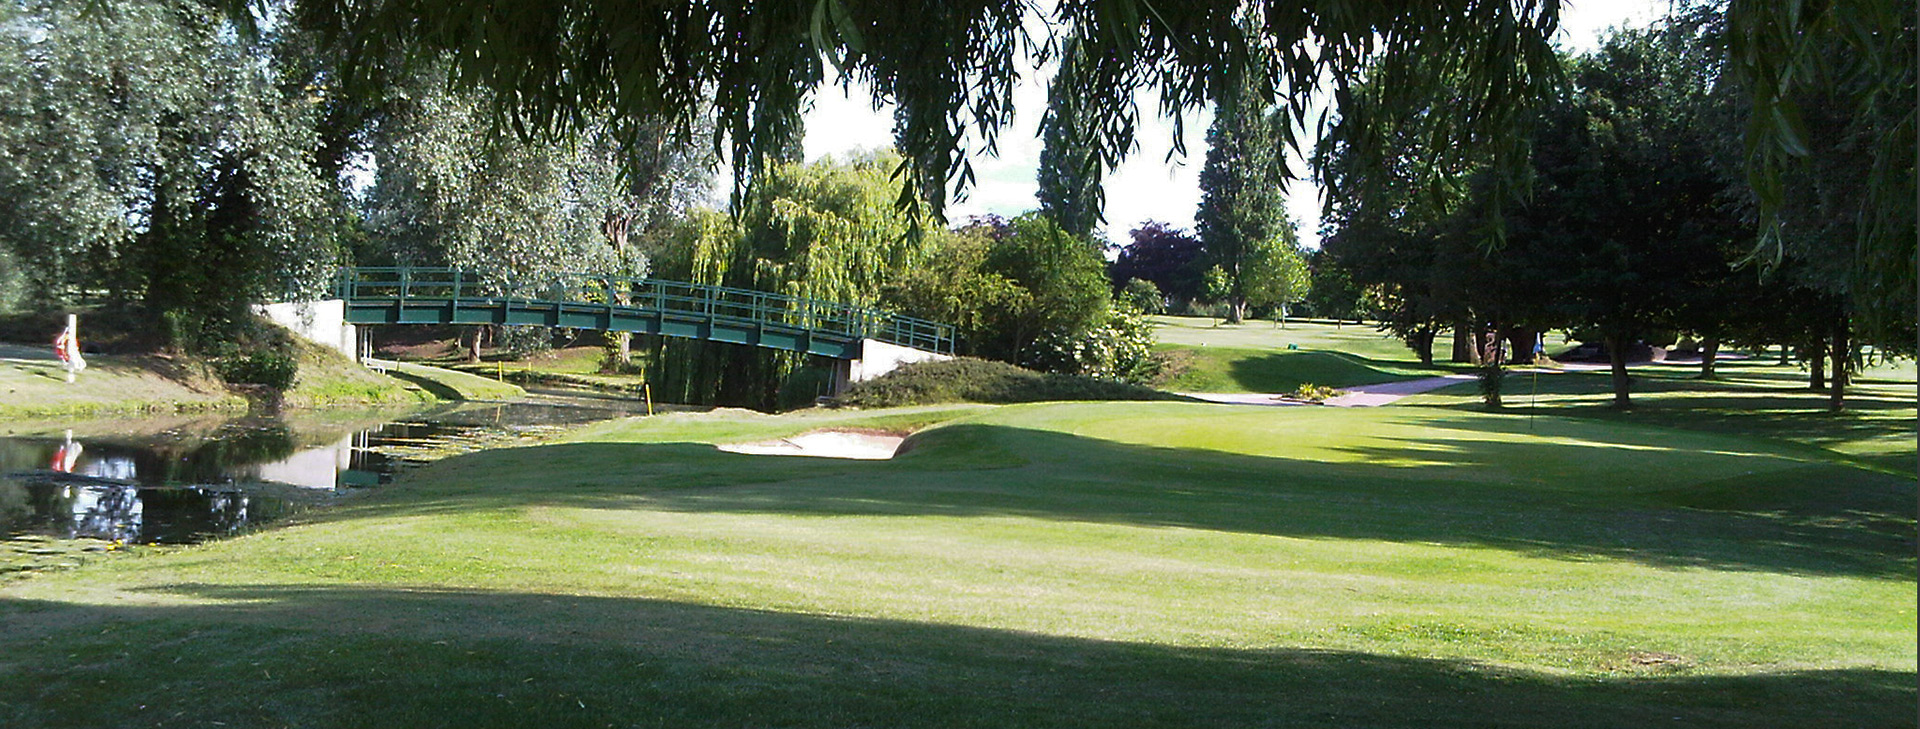 Turfcare Leisure Services Ltd has been caring for golf courses for over 30 years